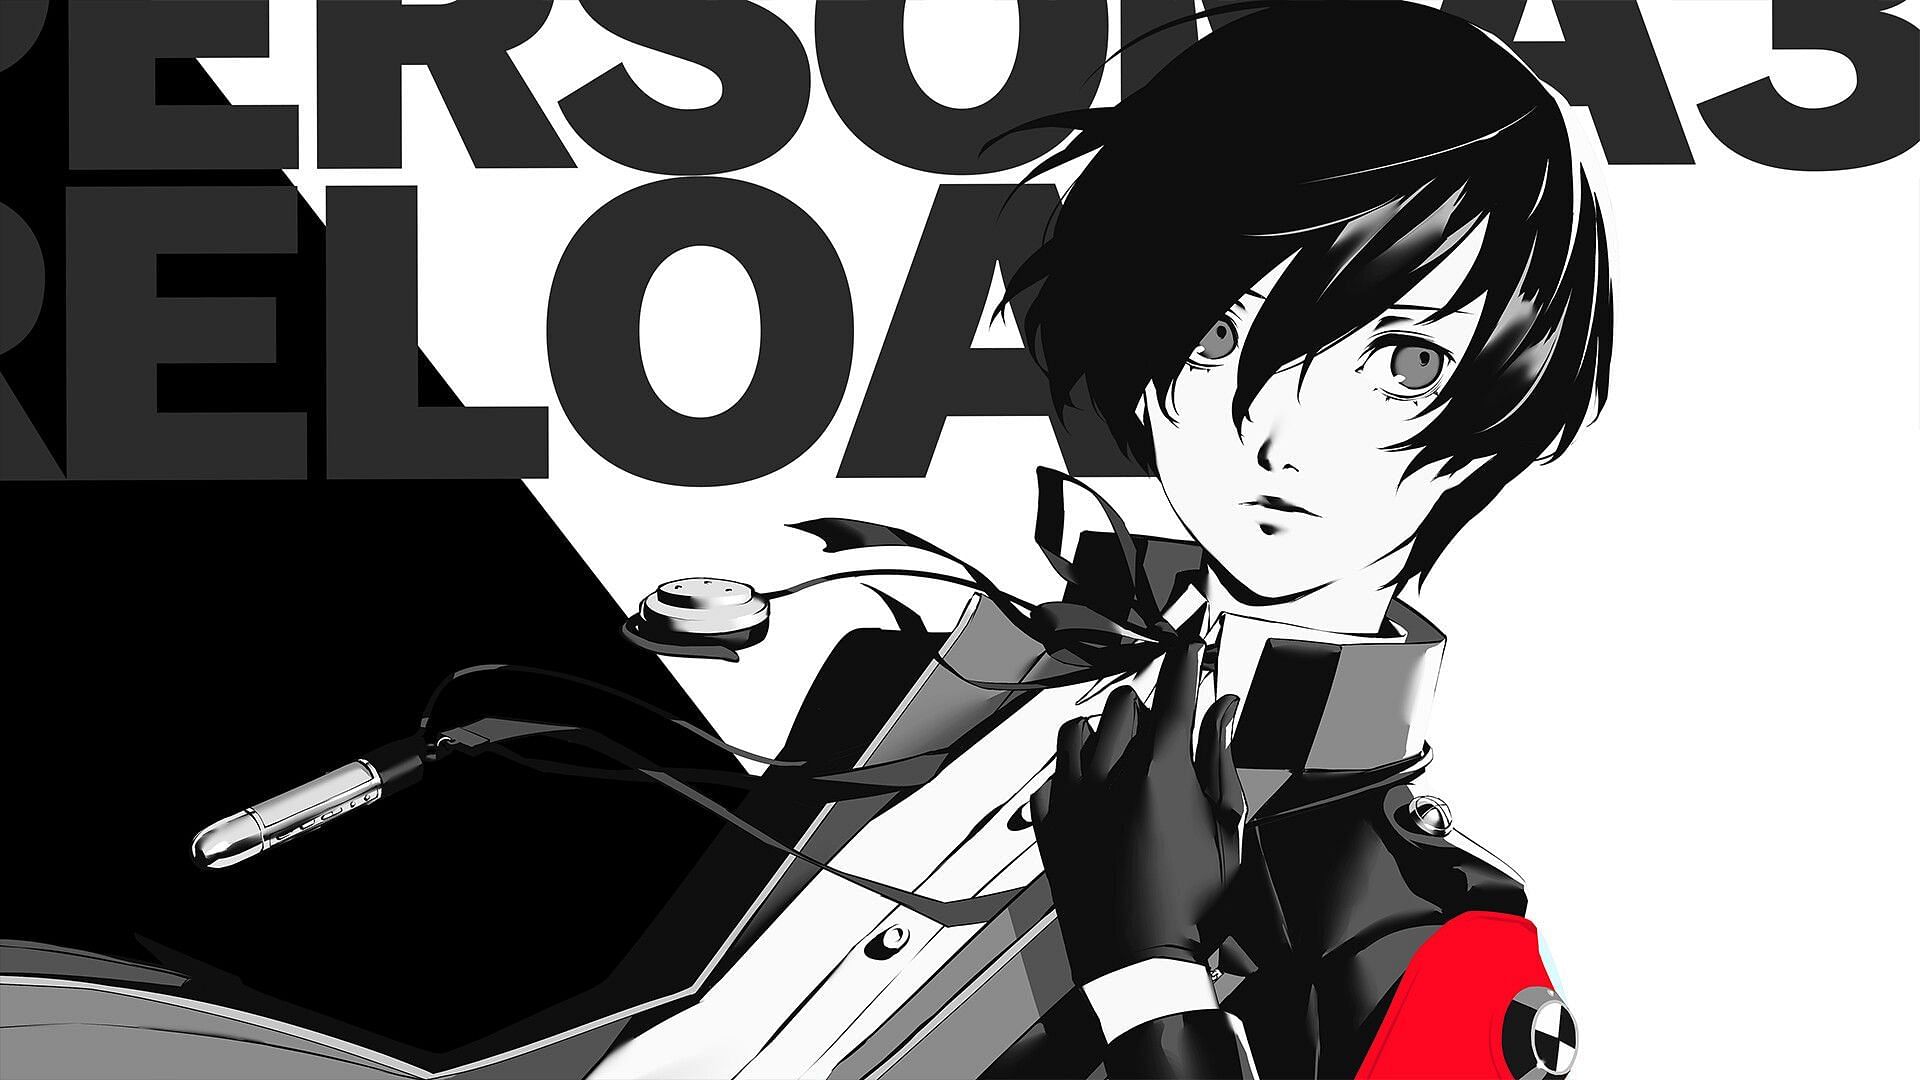 Persona 3 Reload finally gets an official release date (Image via Atlus)